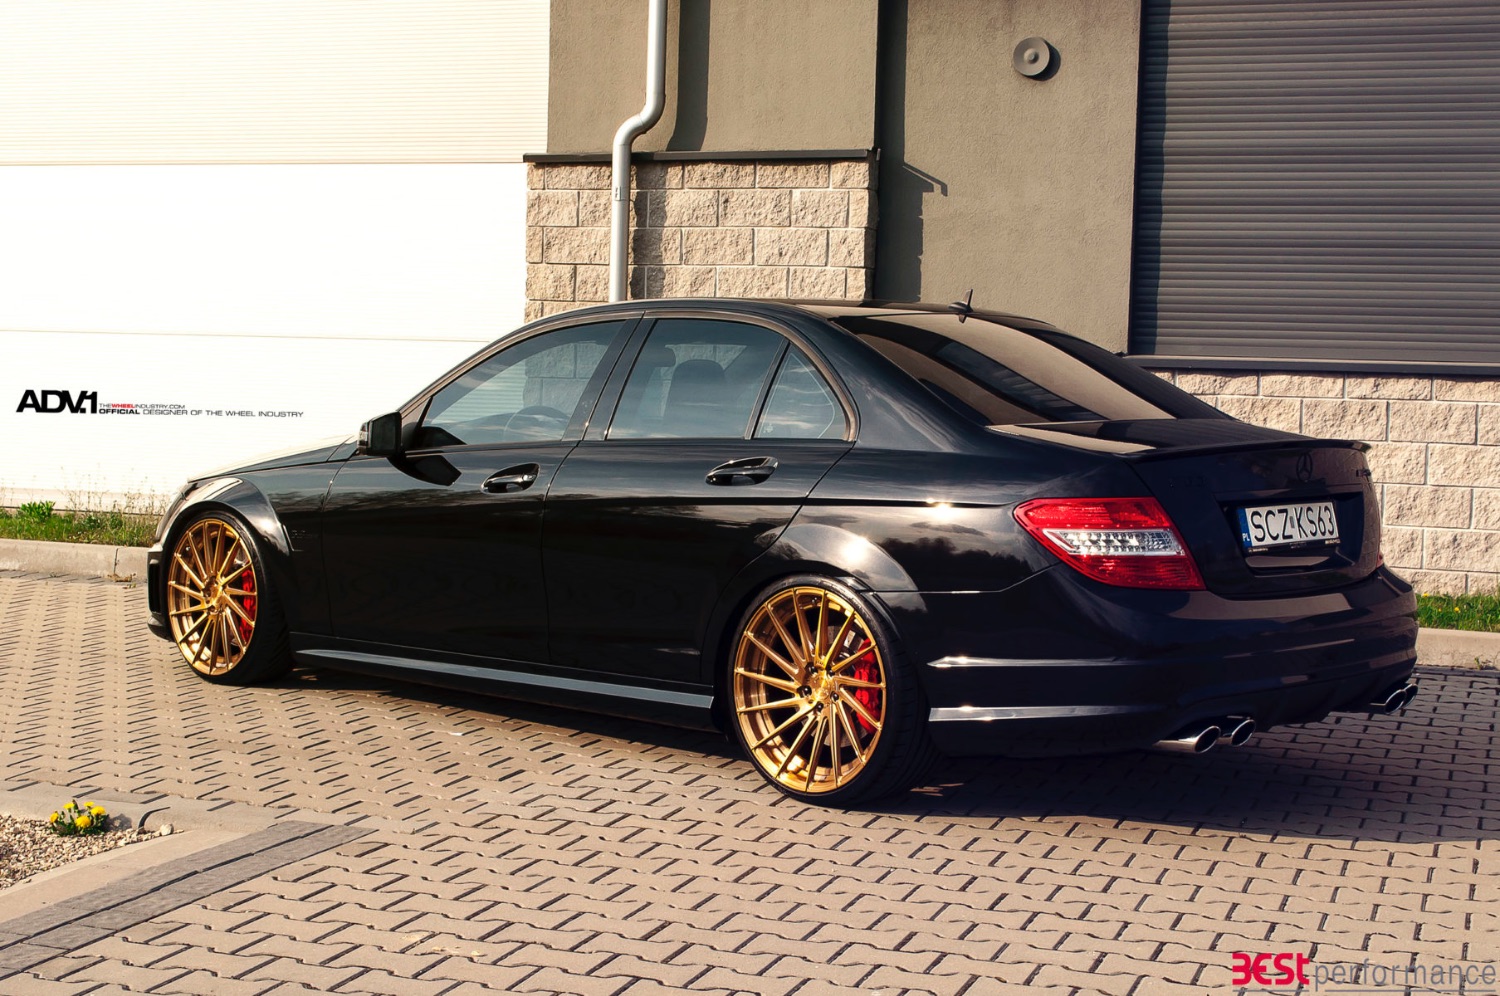 mercedes-c63-amg-directional-bronze-wheels-forged-2-piece-a